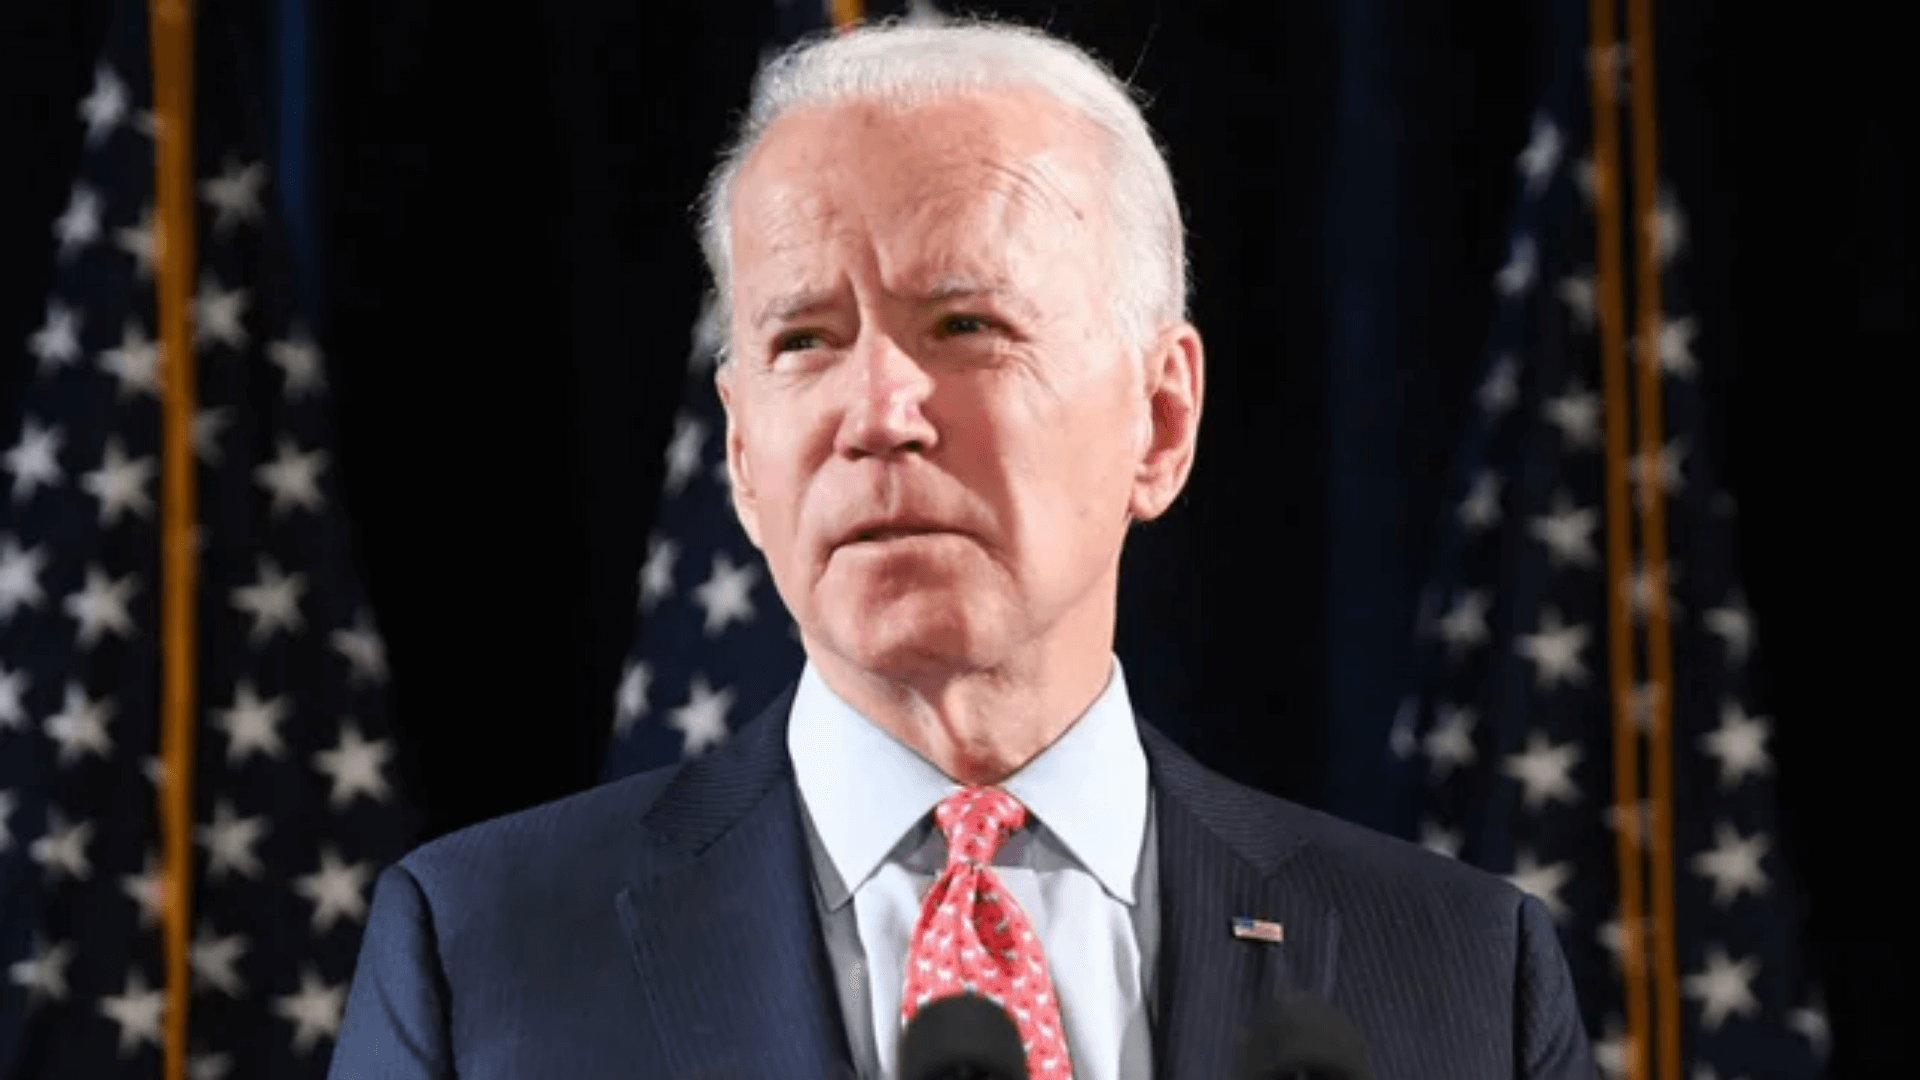 Heres-What-Joe-Bidens-Physician-Has-To-Say-About-His-Health